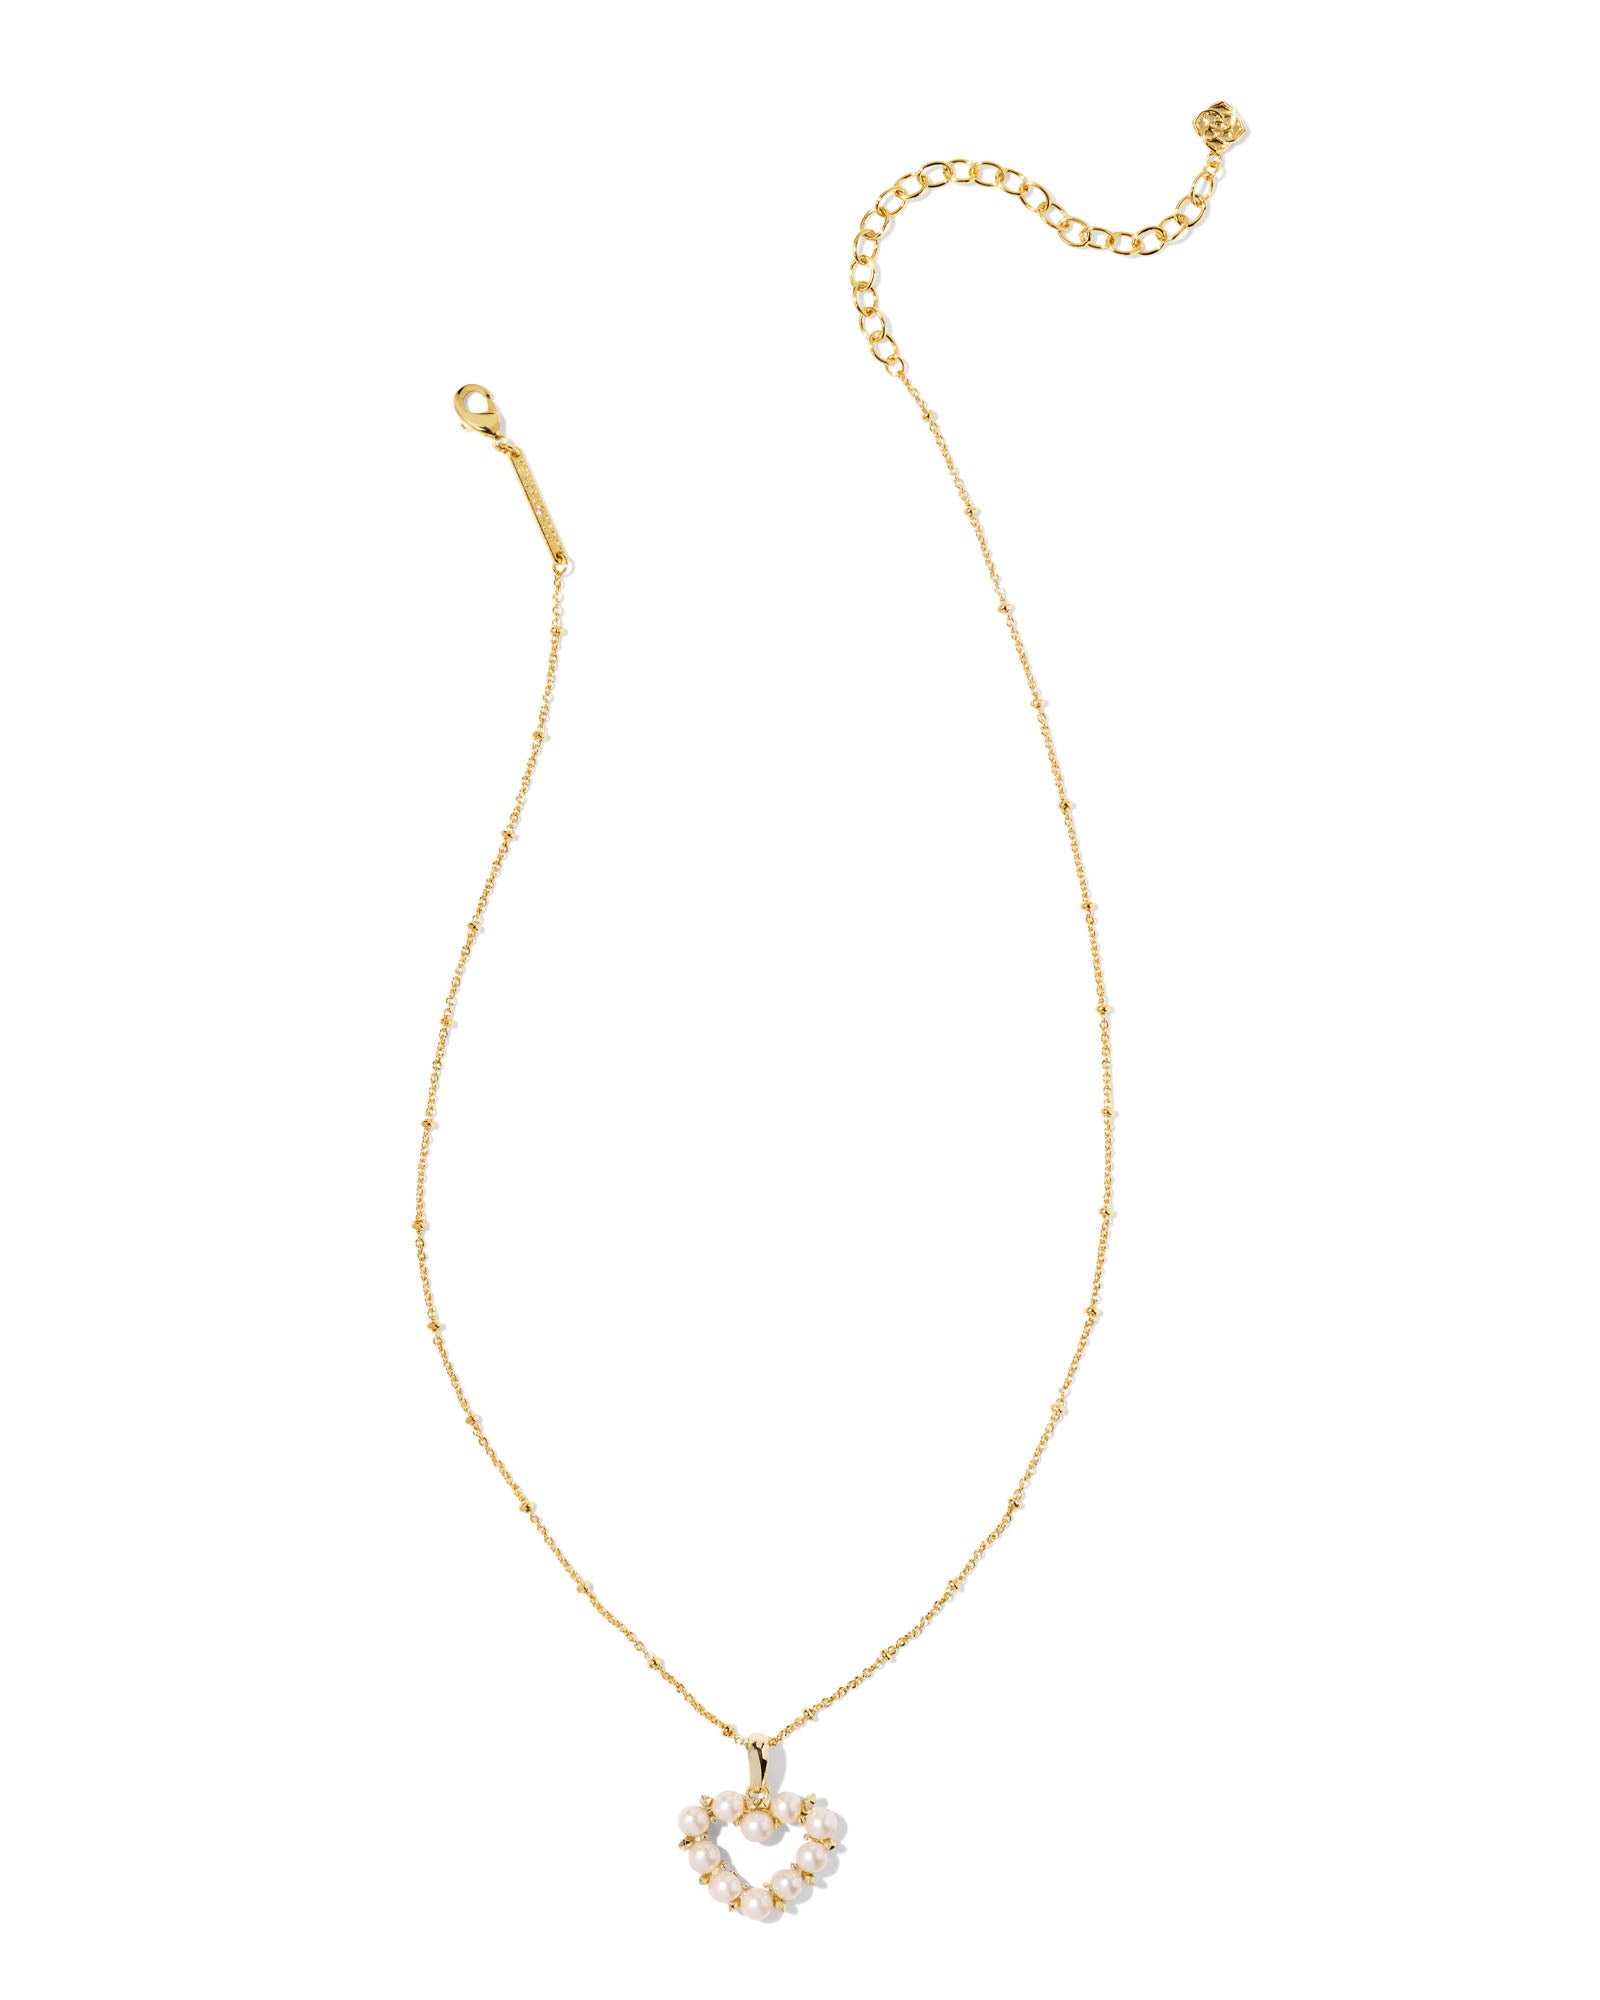 Kendra Scott Ashton Heart Pendant Necklace in White Pearl and Gold Plated